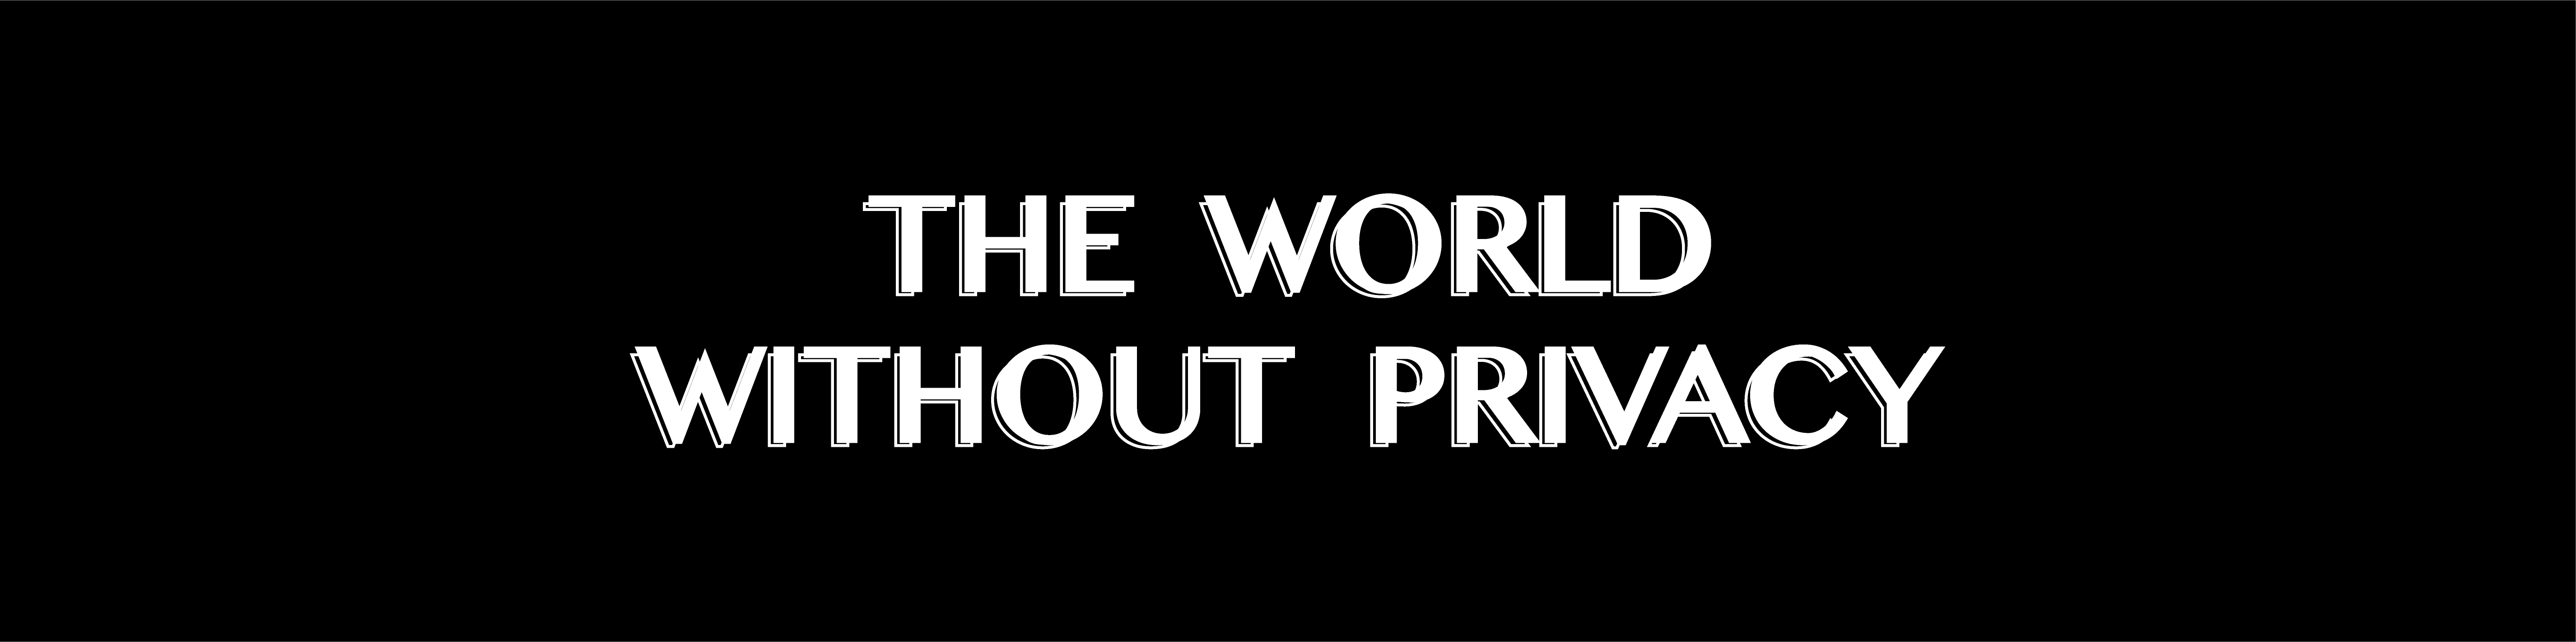 black bar with white text that says 'the world without privacy'